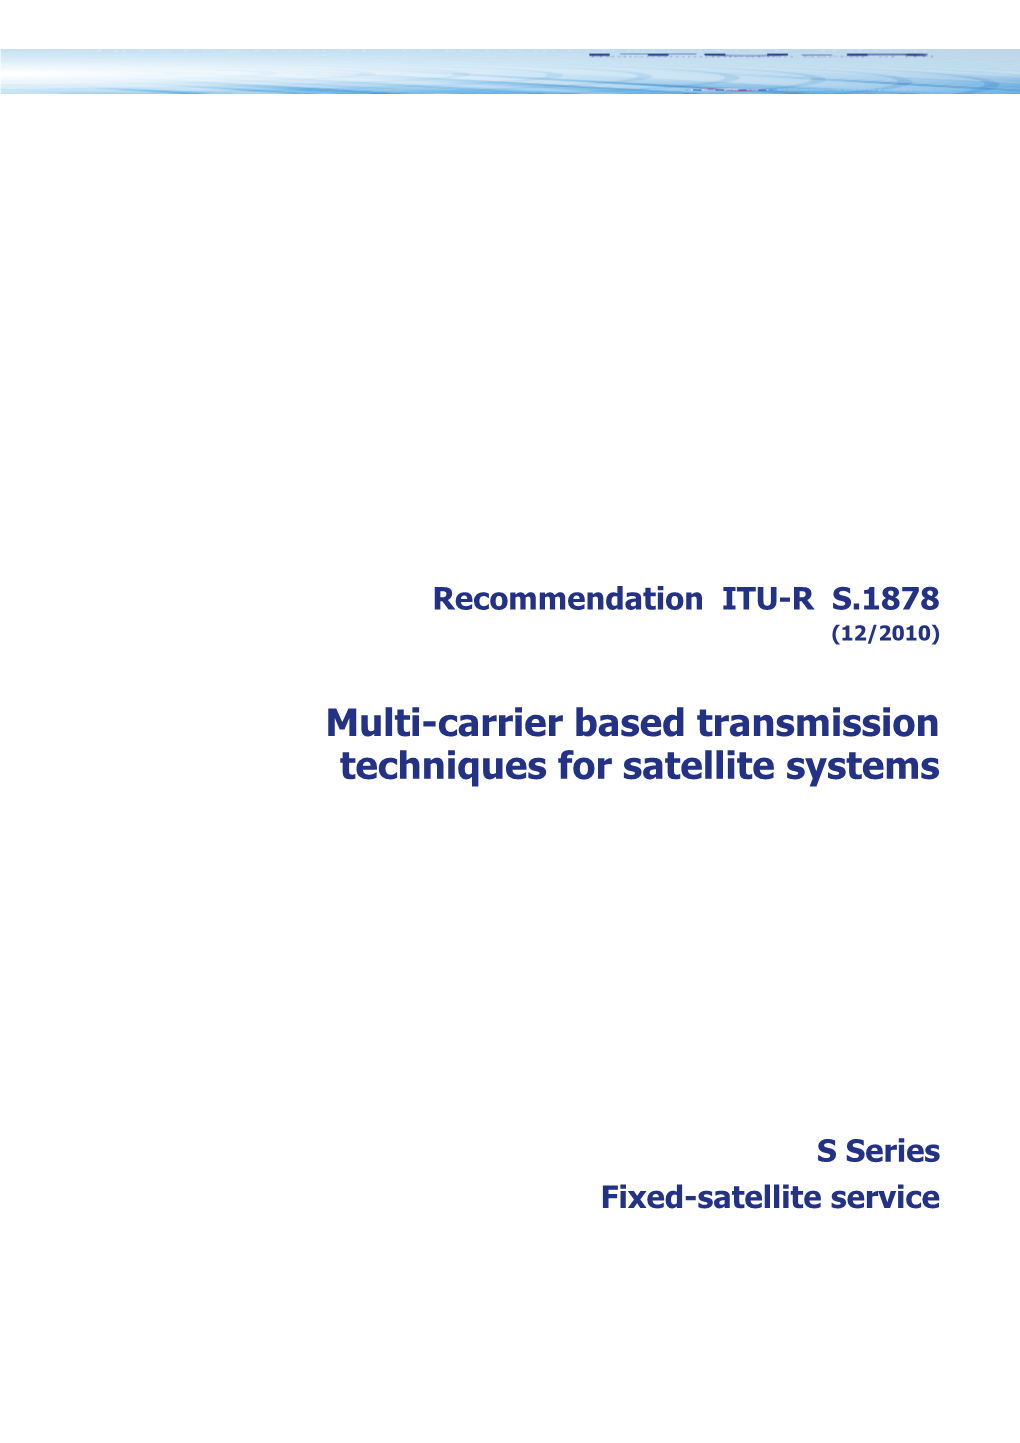 RECOMMENDATION ITU-R S.1878 - Multi-Carrier Based Transmission Techniques for Satellite Systems